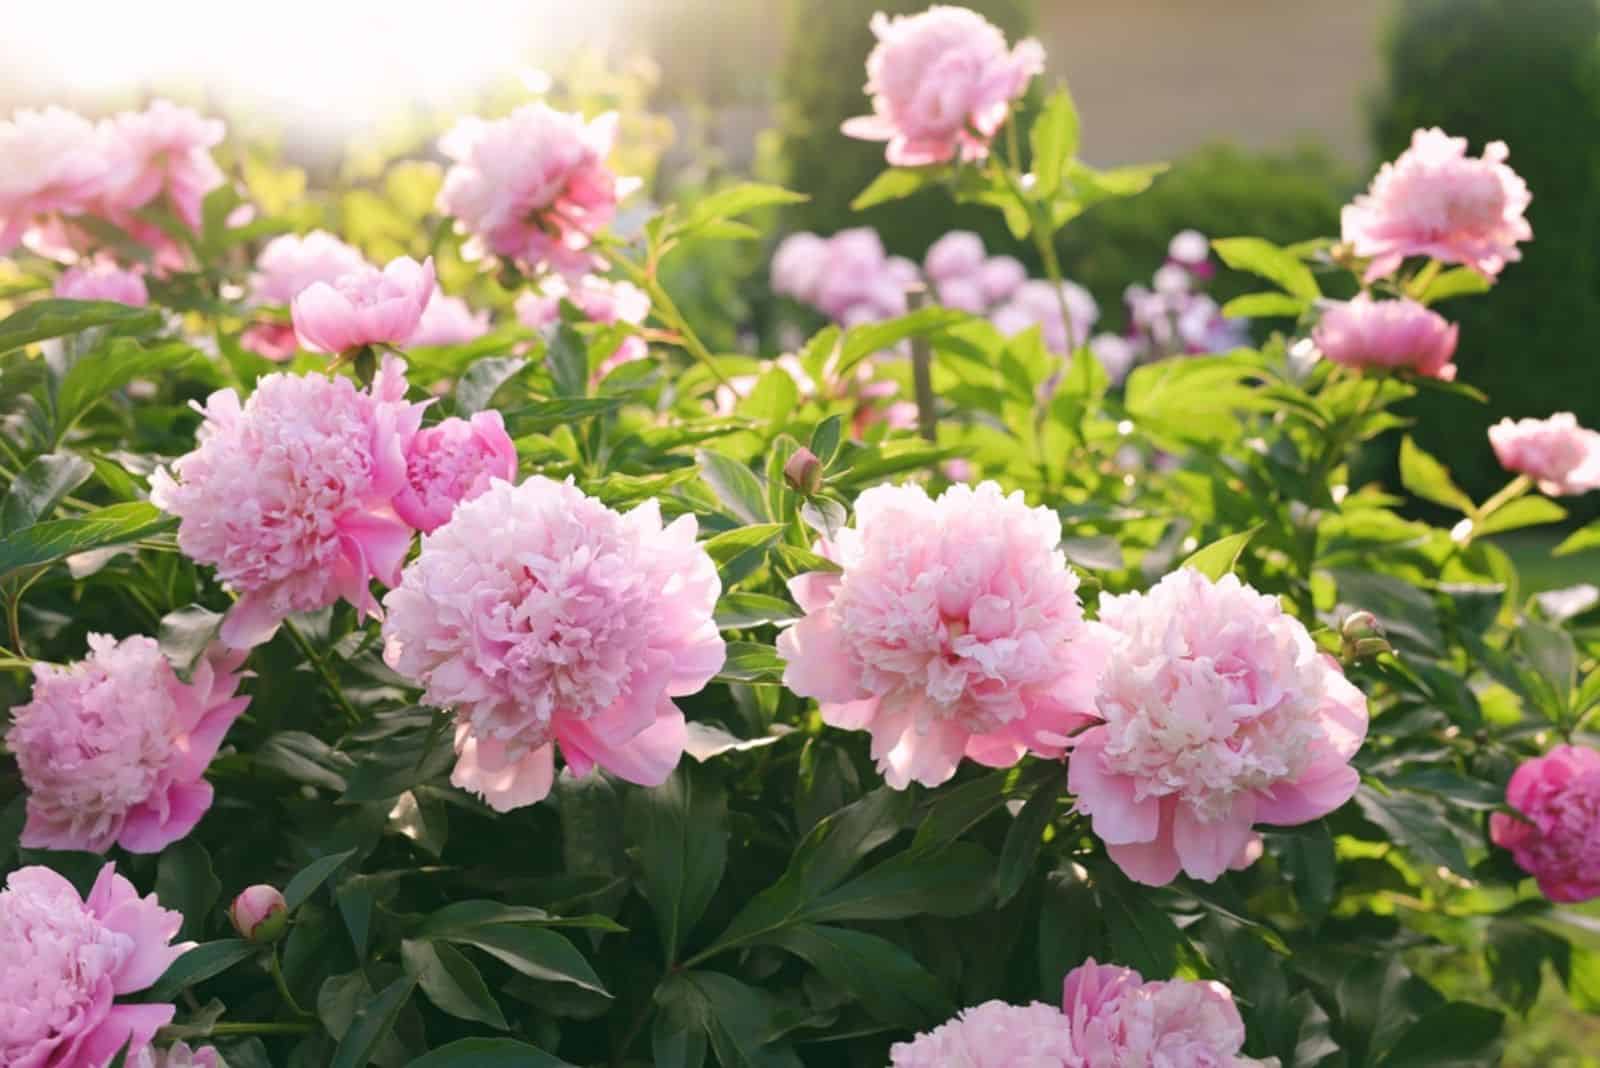 Blooming peony plant